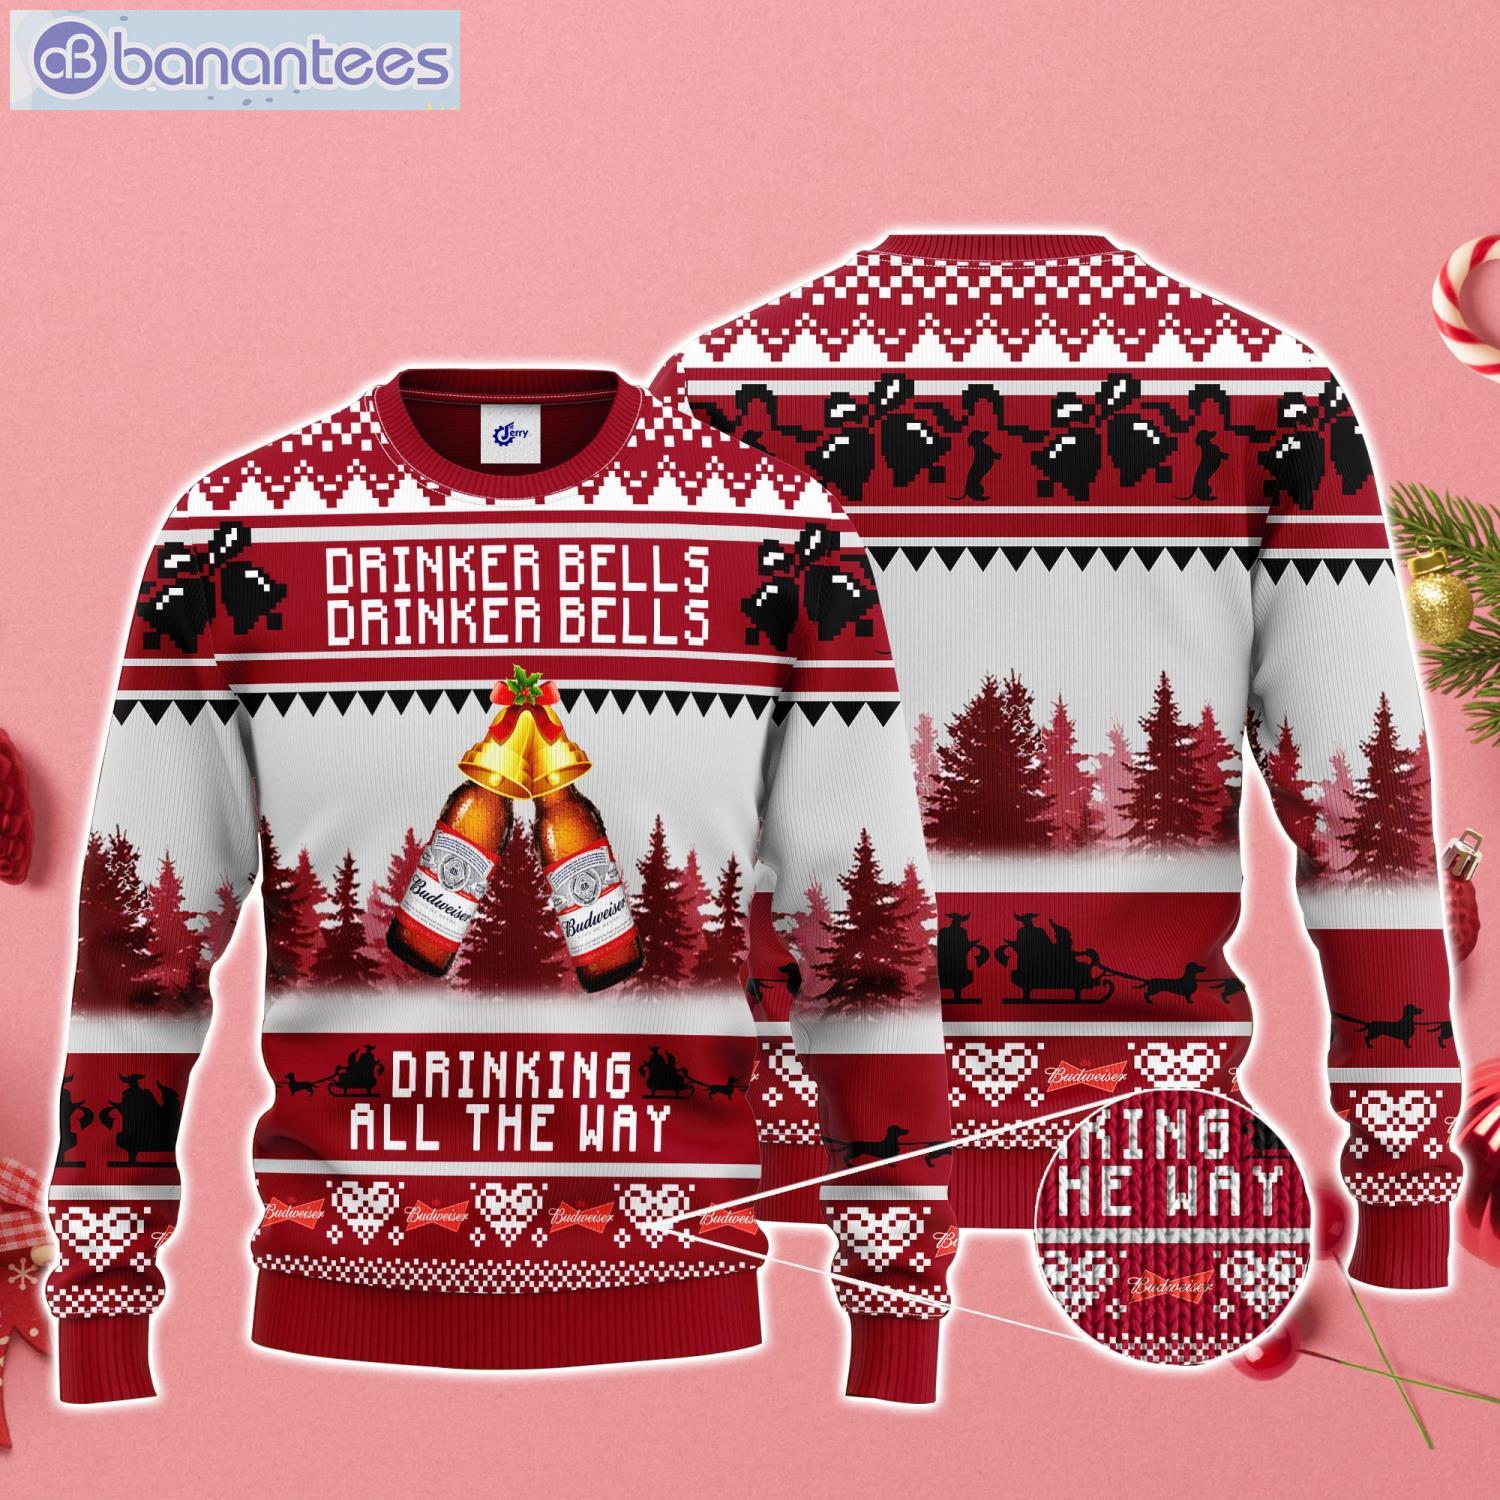 Budweiser Drinker Bells Drinker Bells Drinking All The Way Ugly Christmas Sweater Product Photo 1